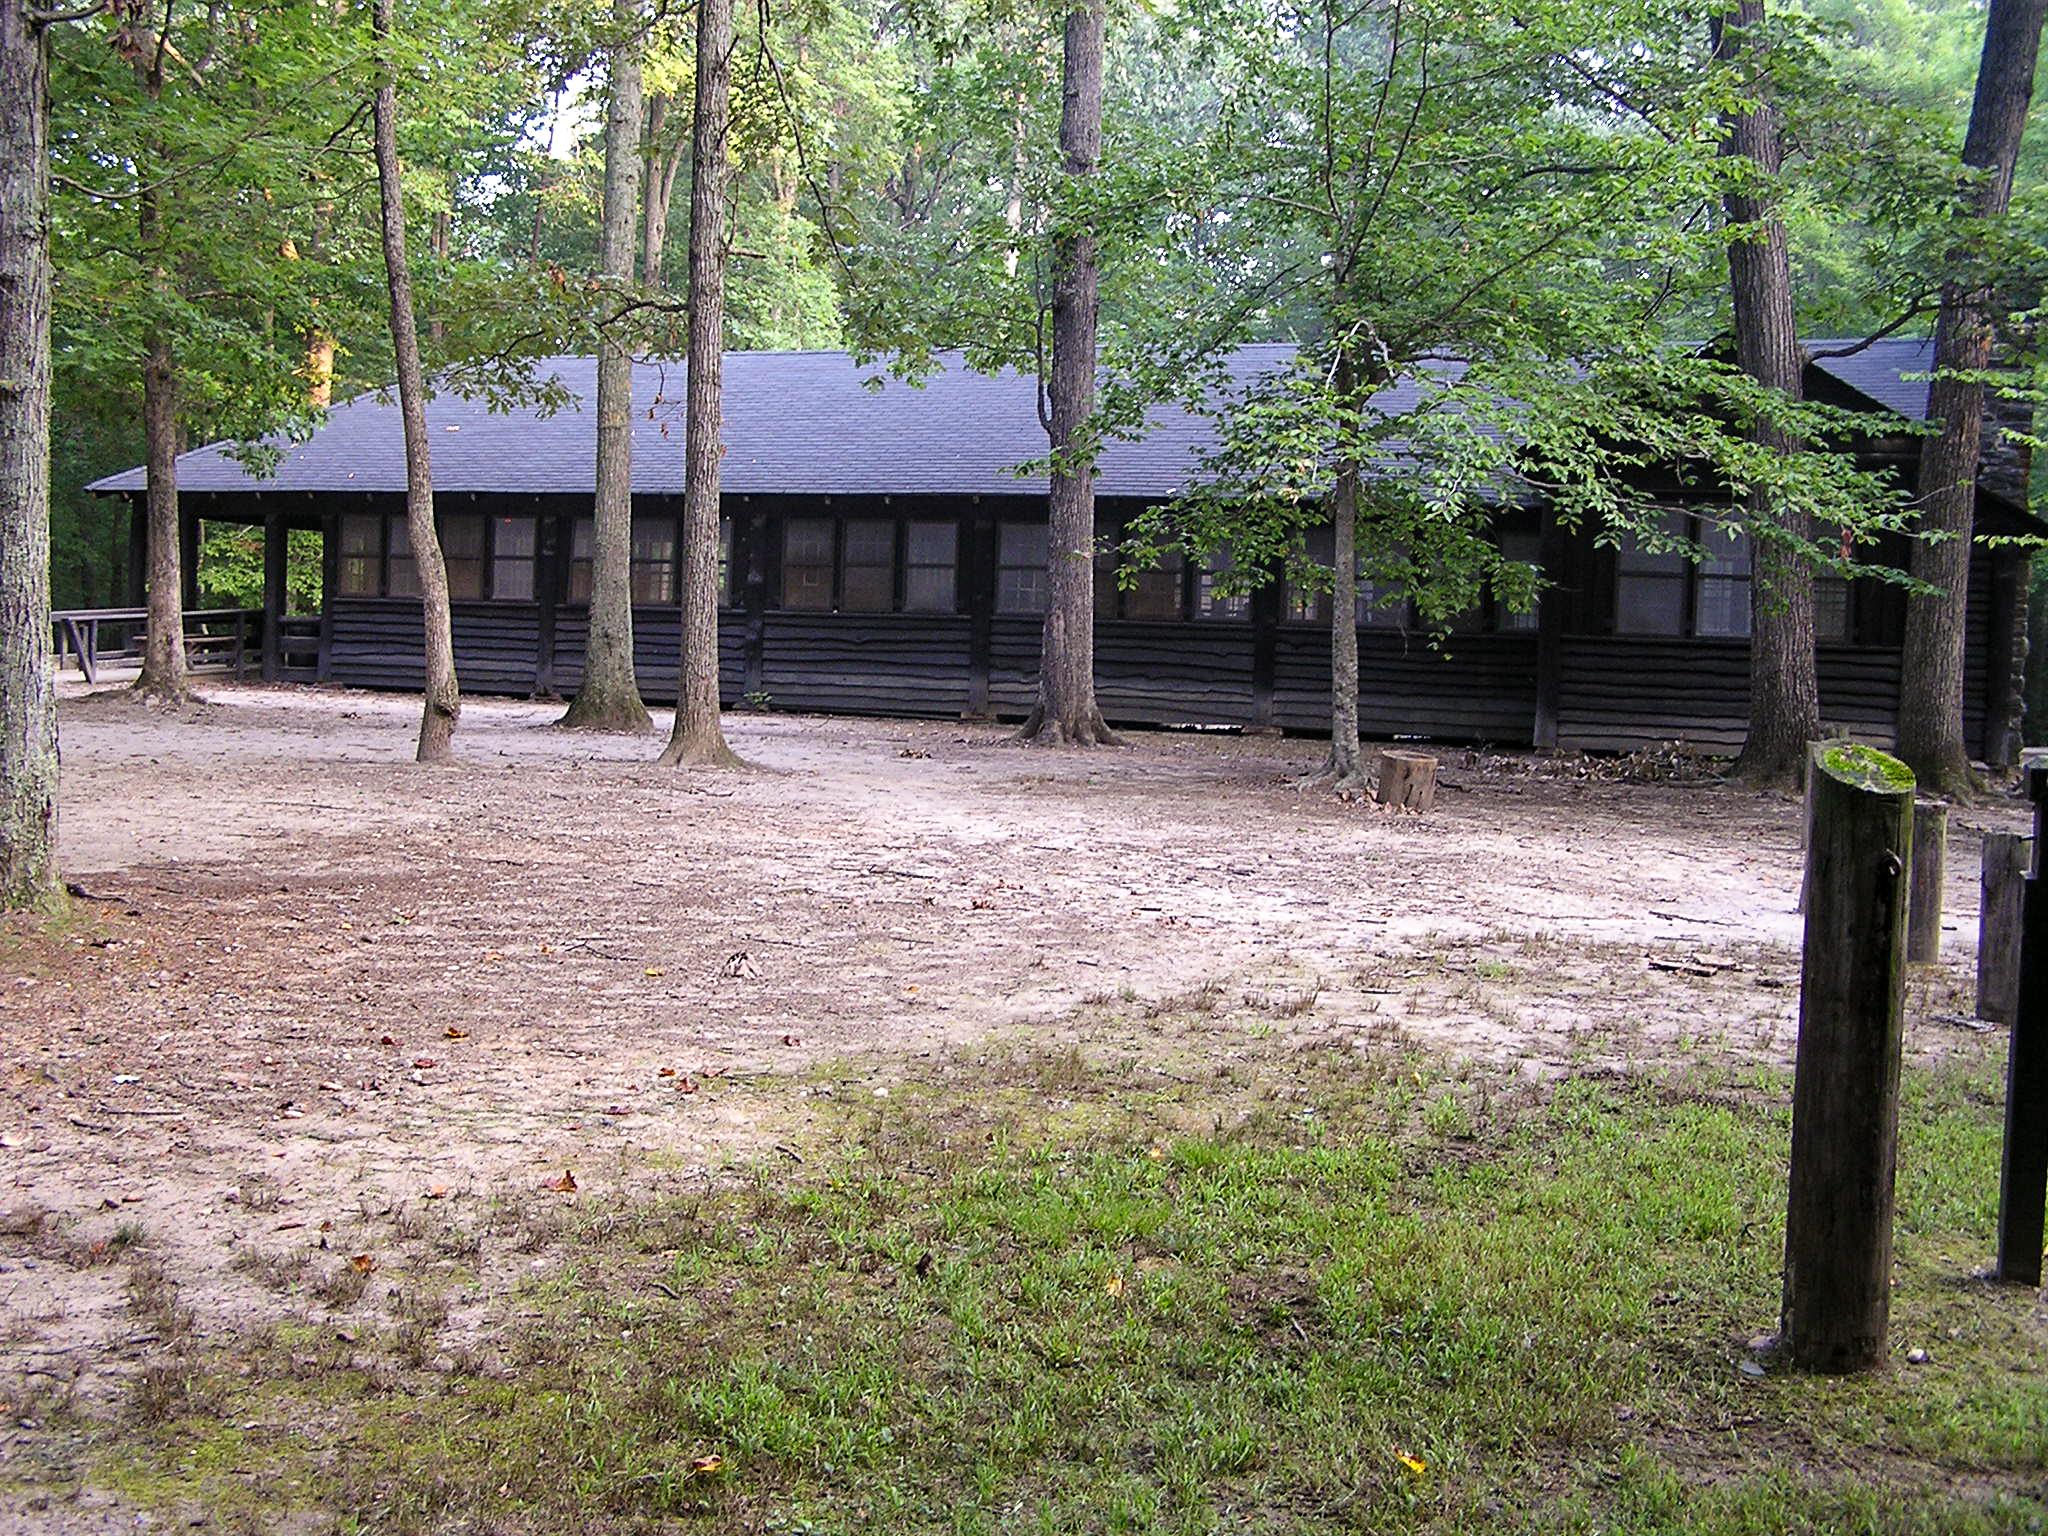 A dark brown wood building sits among the woods